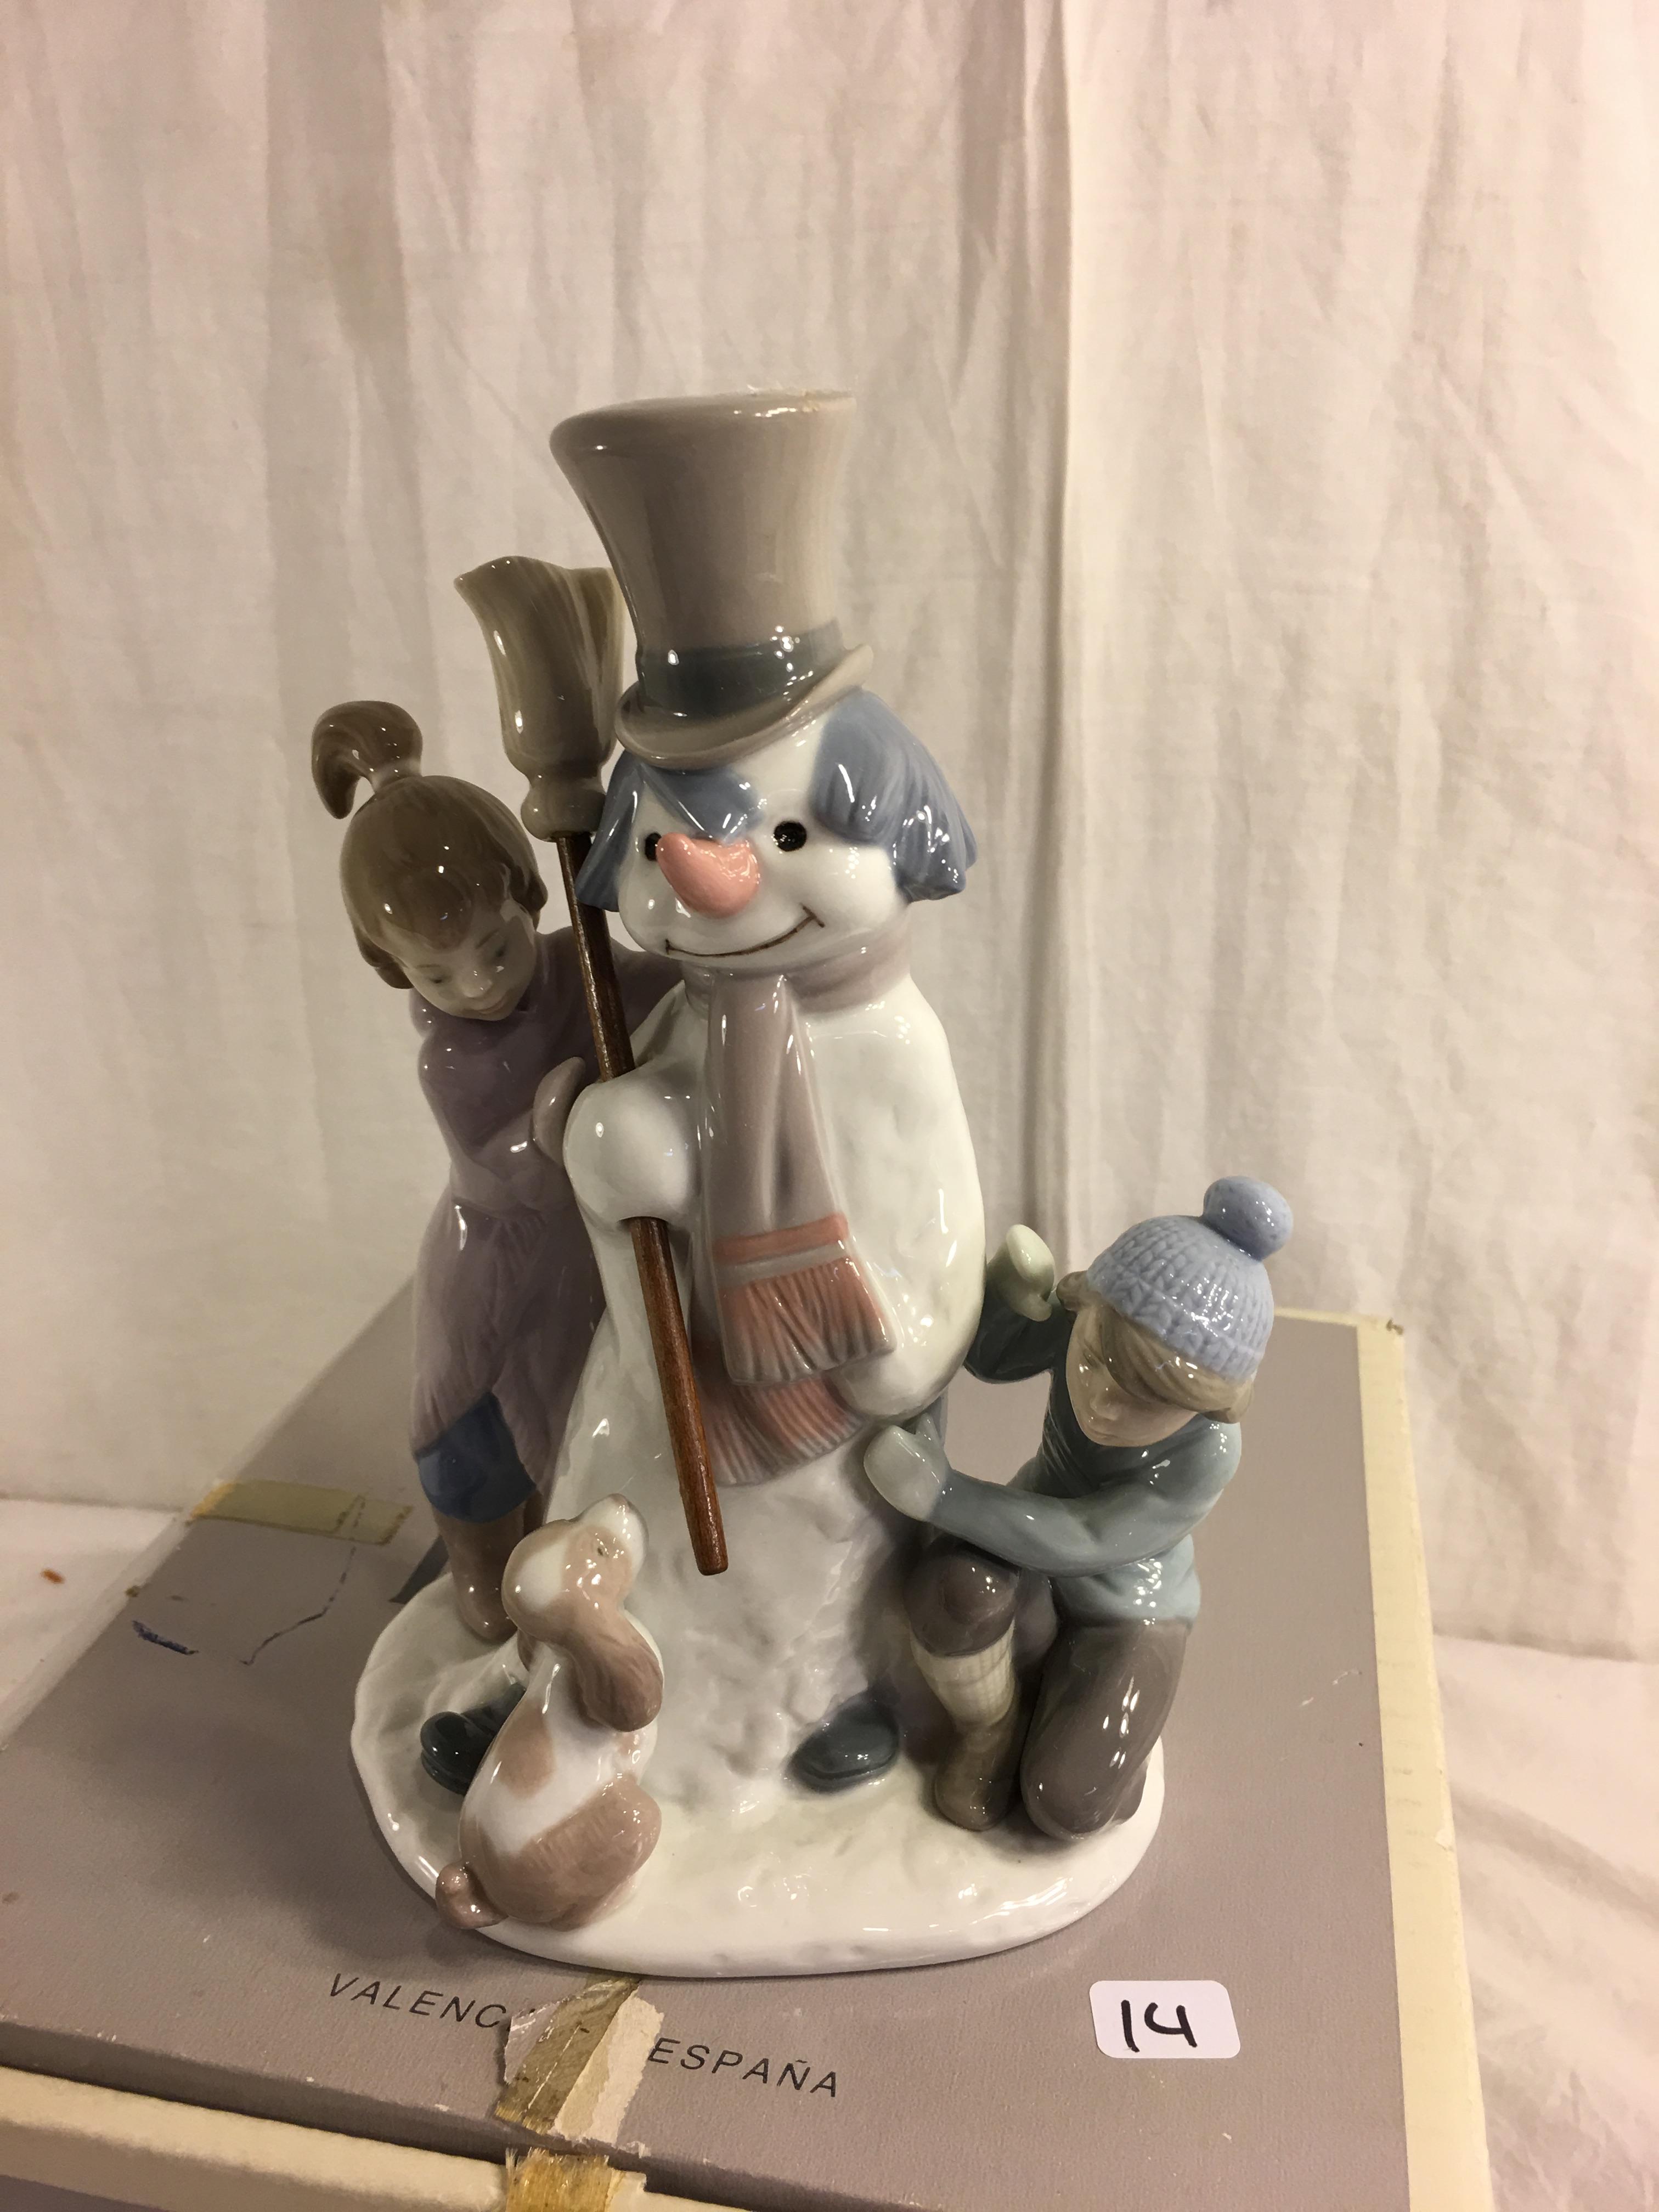 Collector Vintage Lladro Porcelain # 5713 Figural Grouping "The Snowman" Box Size:10x9x6.5"